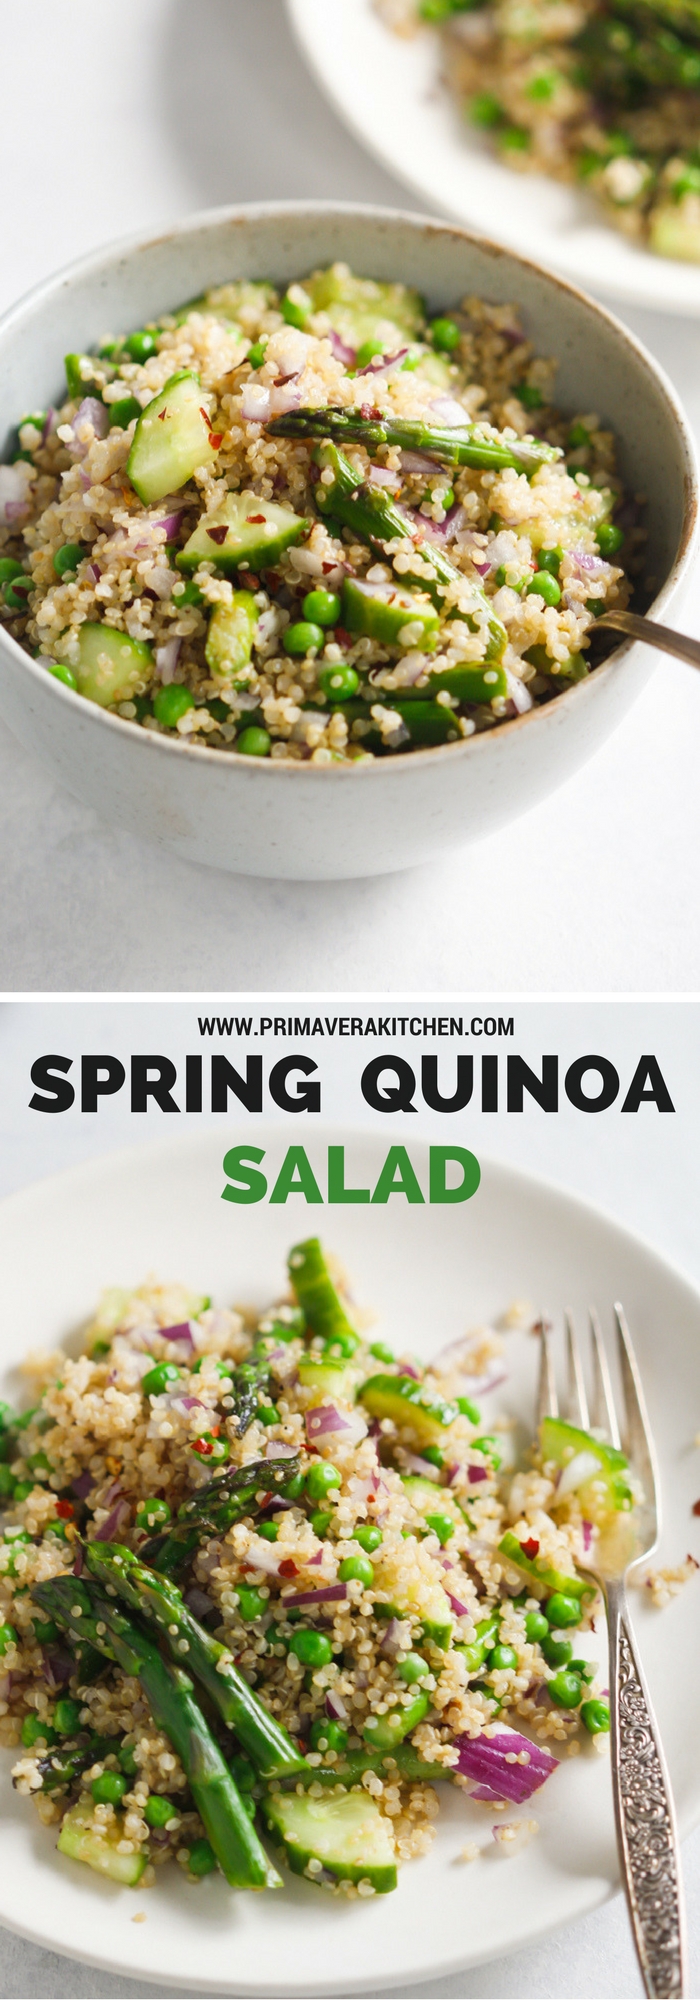 Spring Quinoa Salad - This Spring Quinoa Salad is loaded with asparagus, peas, cucumber, red onions and with an easy and delicious homemade vinaigrette. | www.primaverakitchen.com